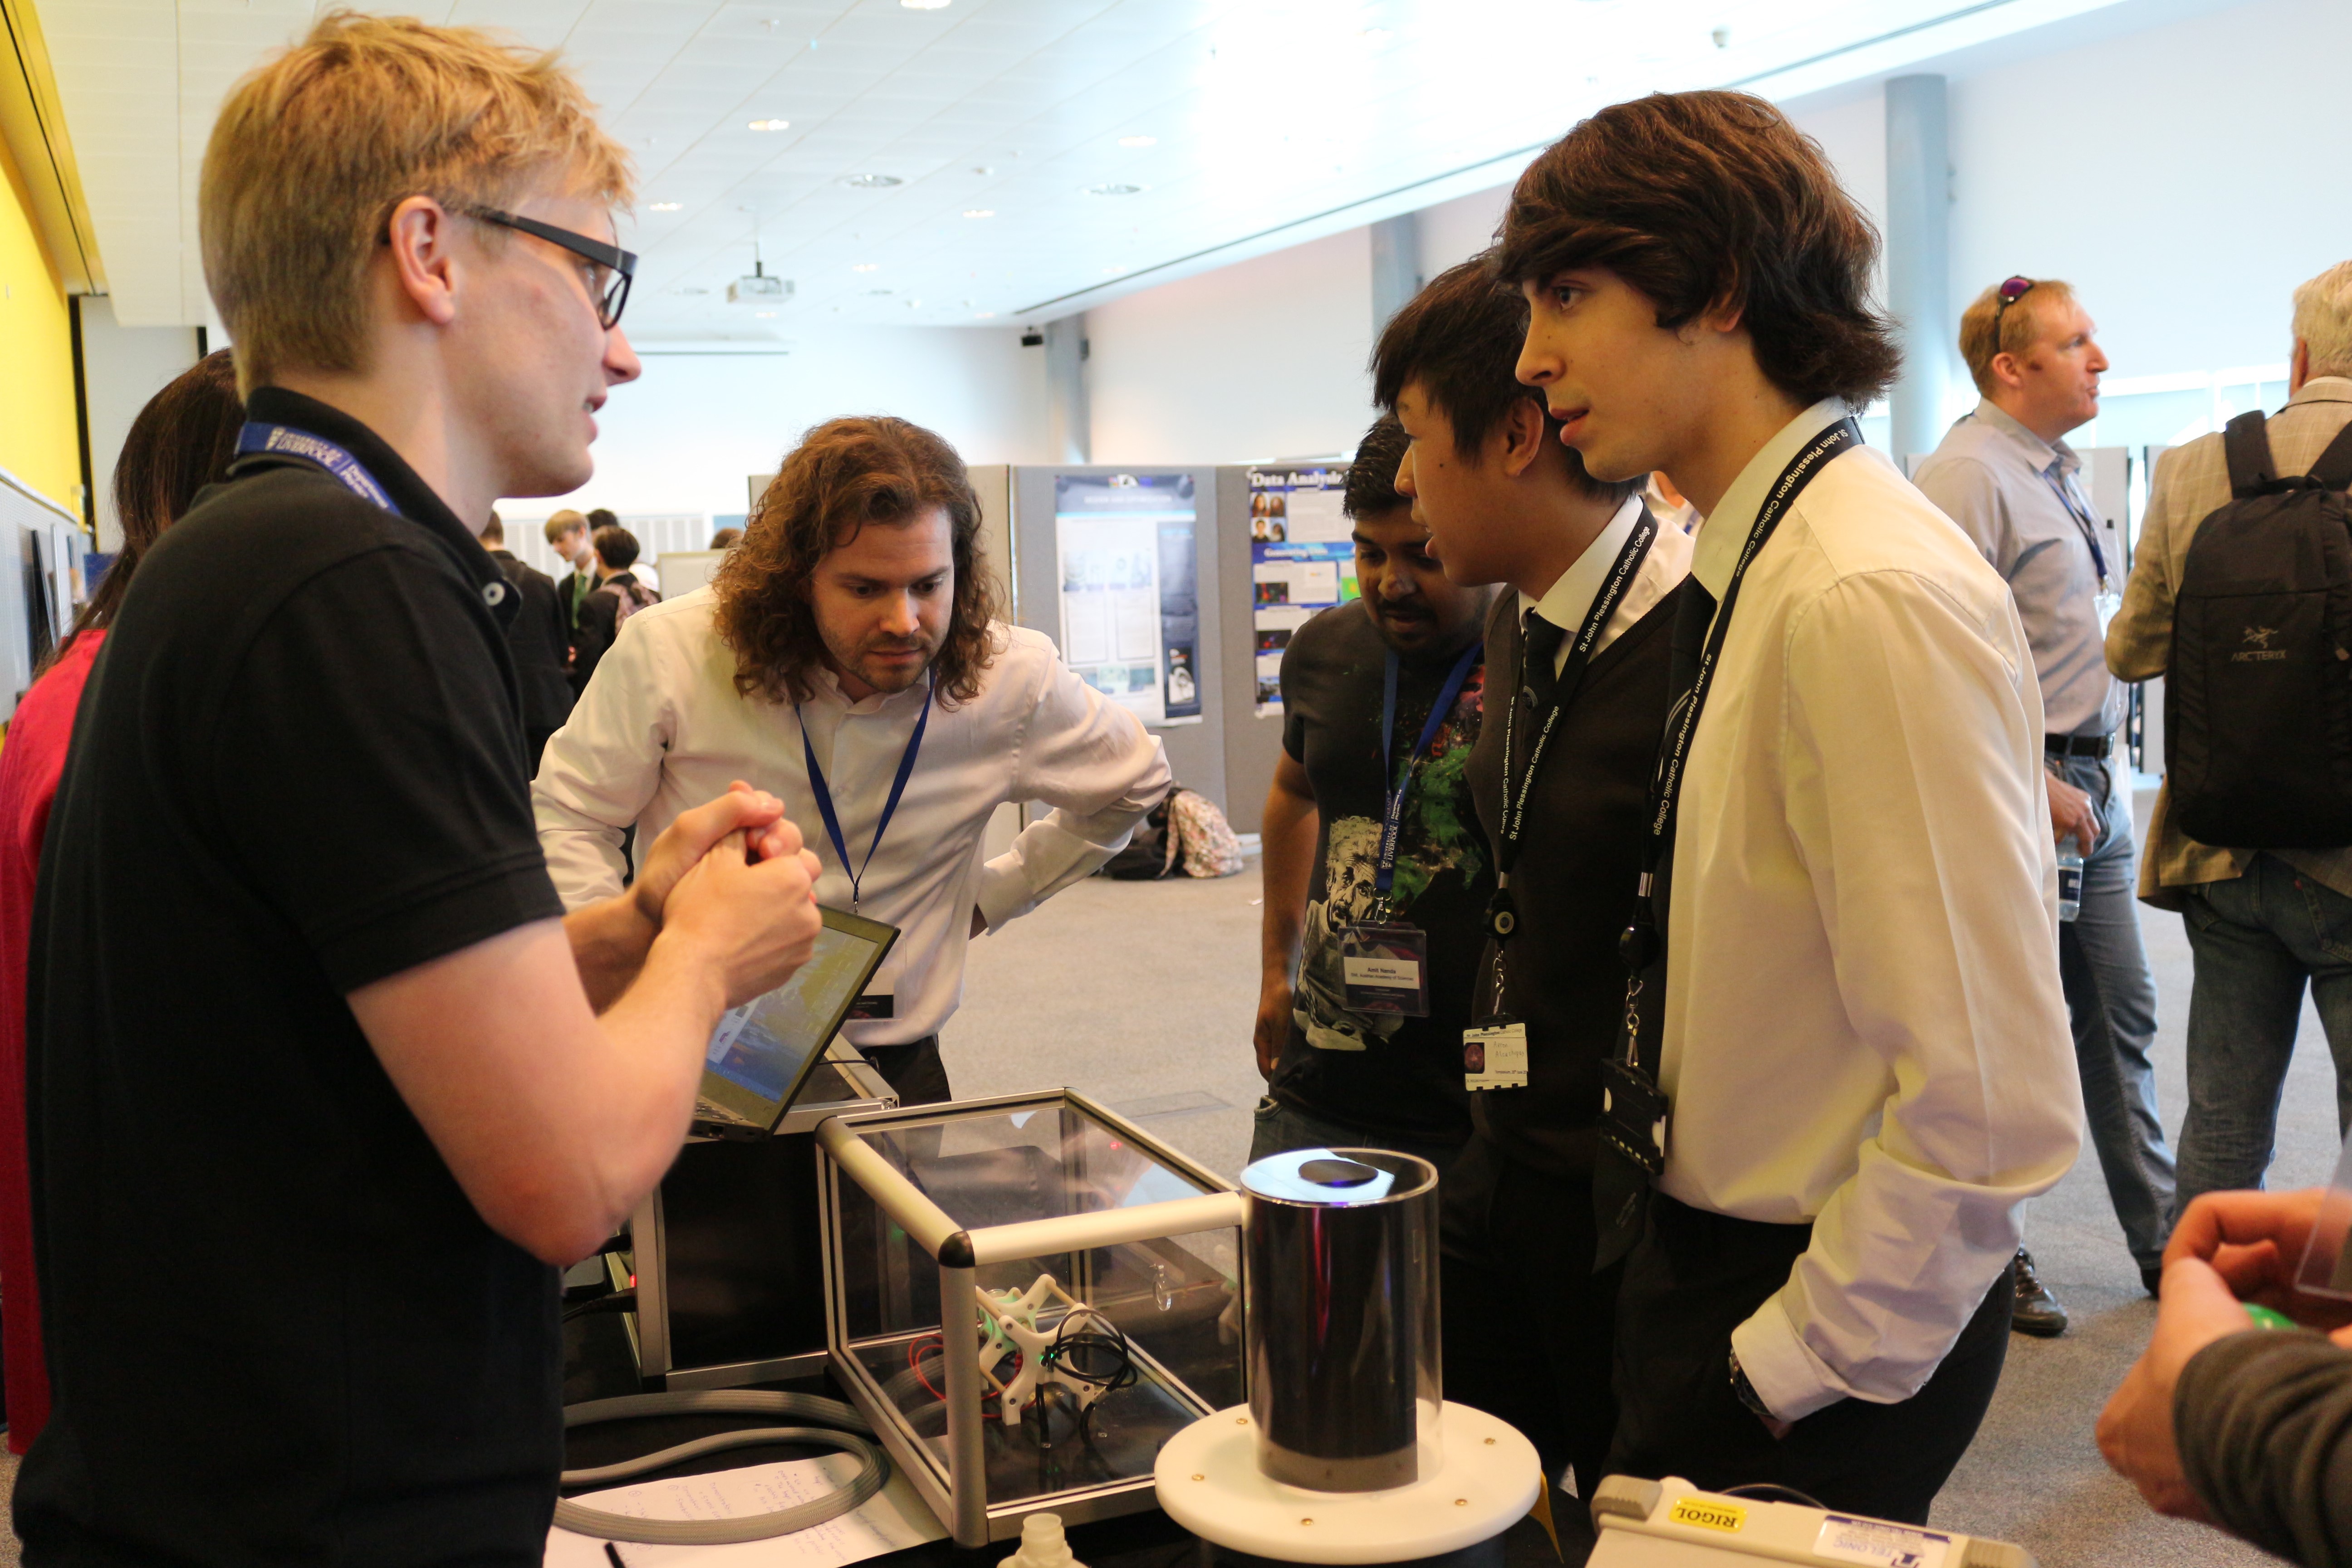 Young delegates at an AVA symposium had the opportunity to experience science up close, demonstrated by AVA Fellows (Image: University of Liverpool)